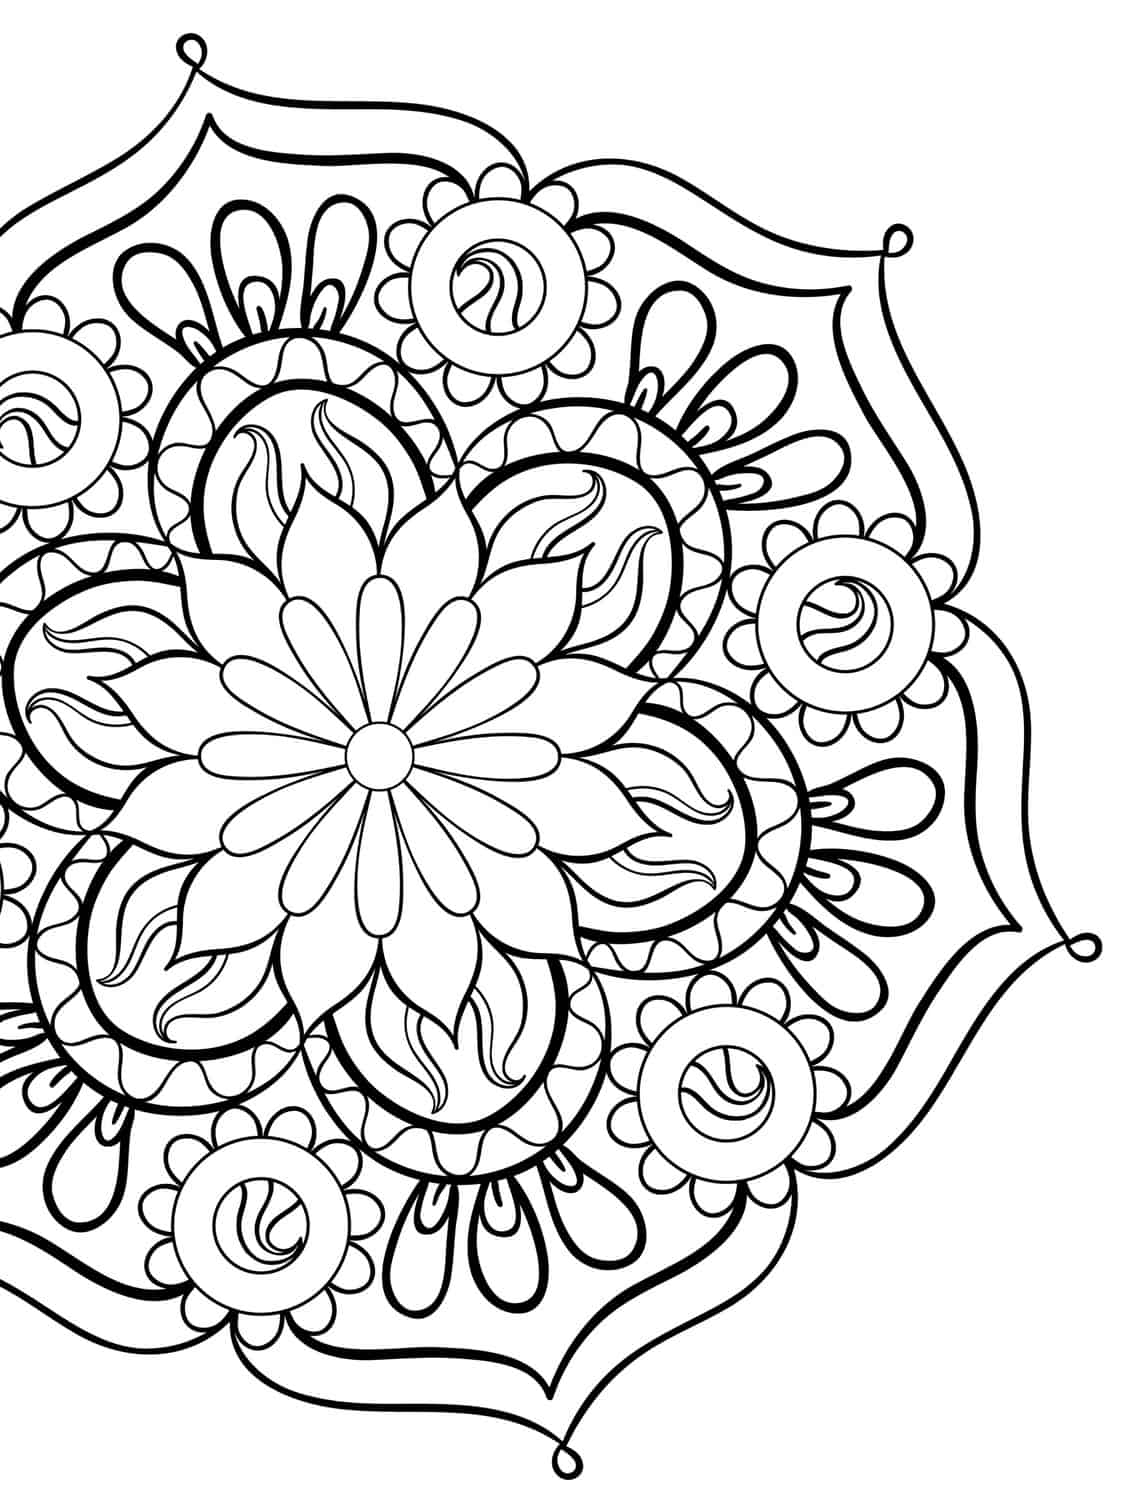 mandala coloring book pages colored - photo #34